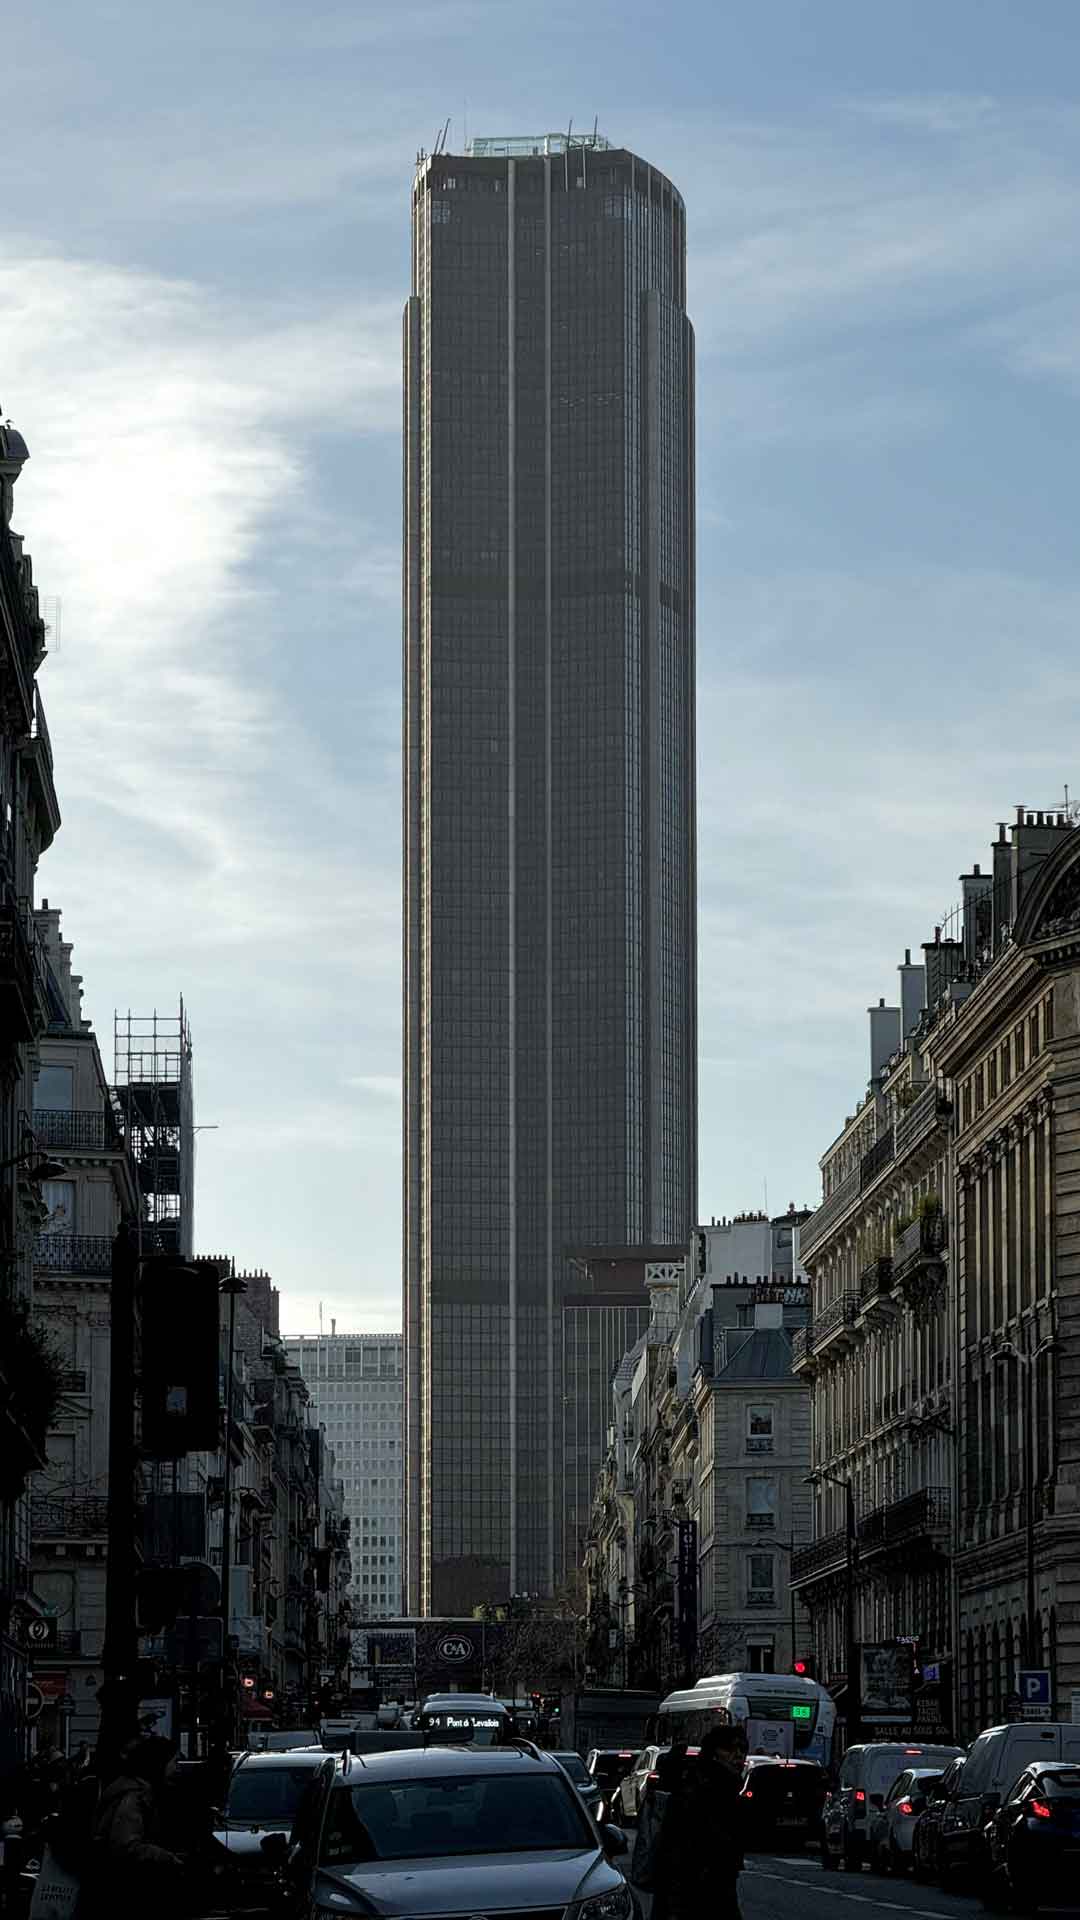 Exterior of montparnasse tower during the day